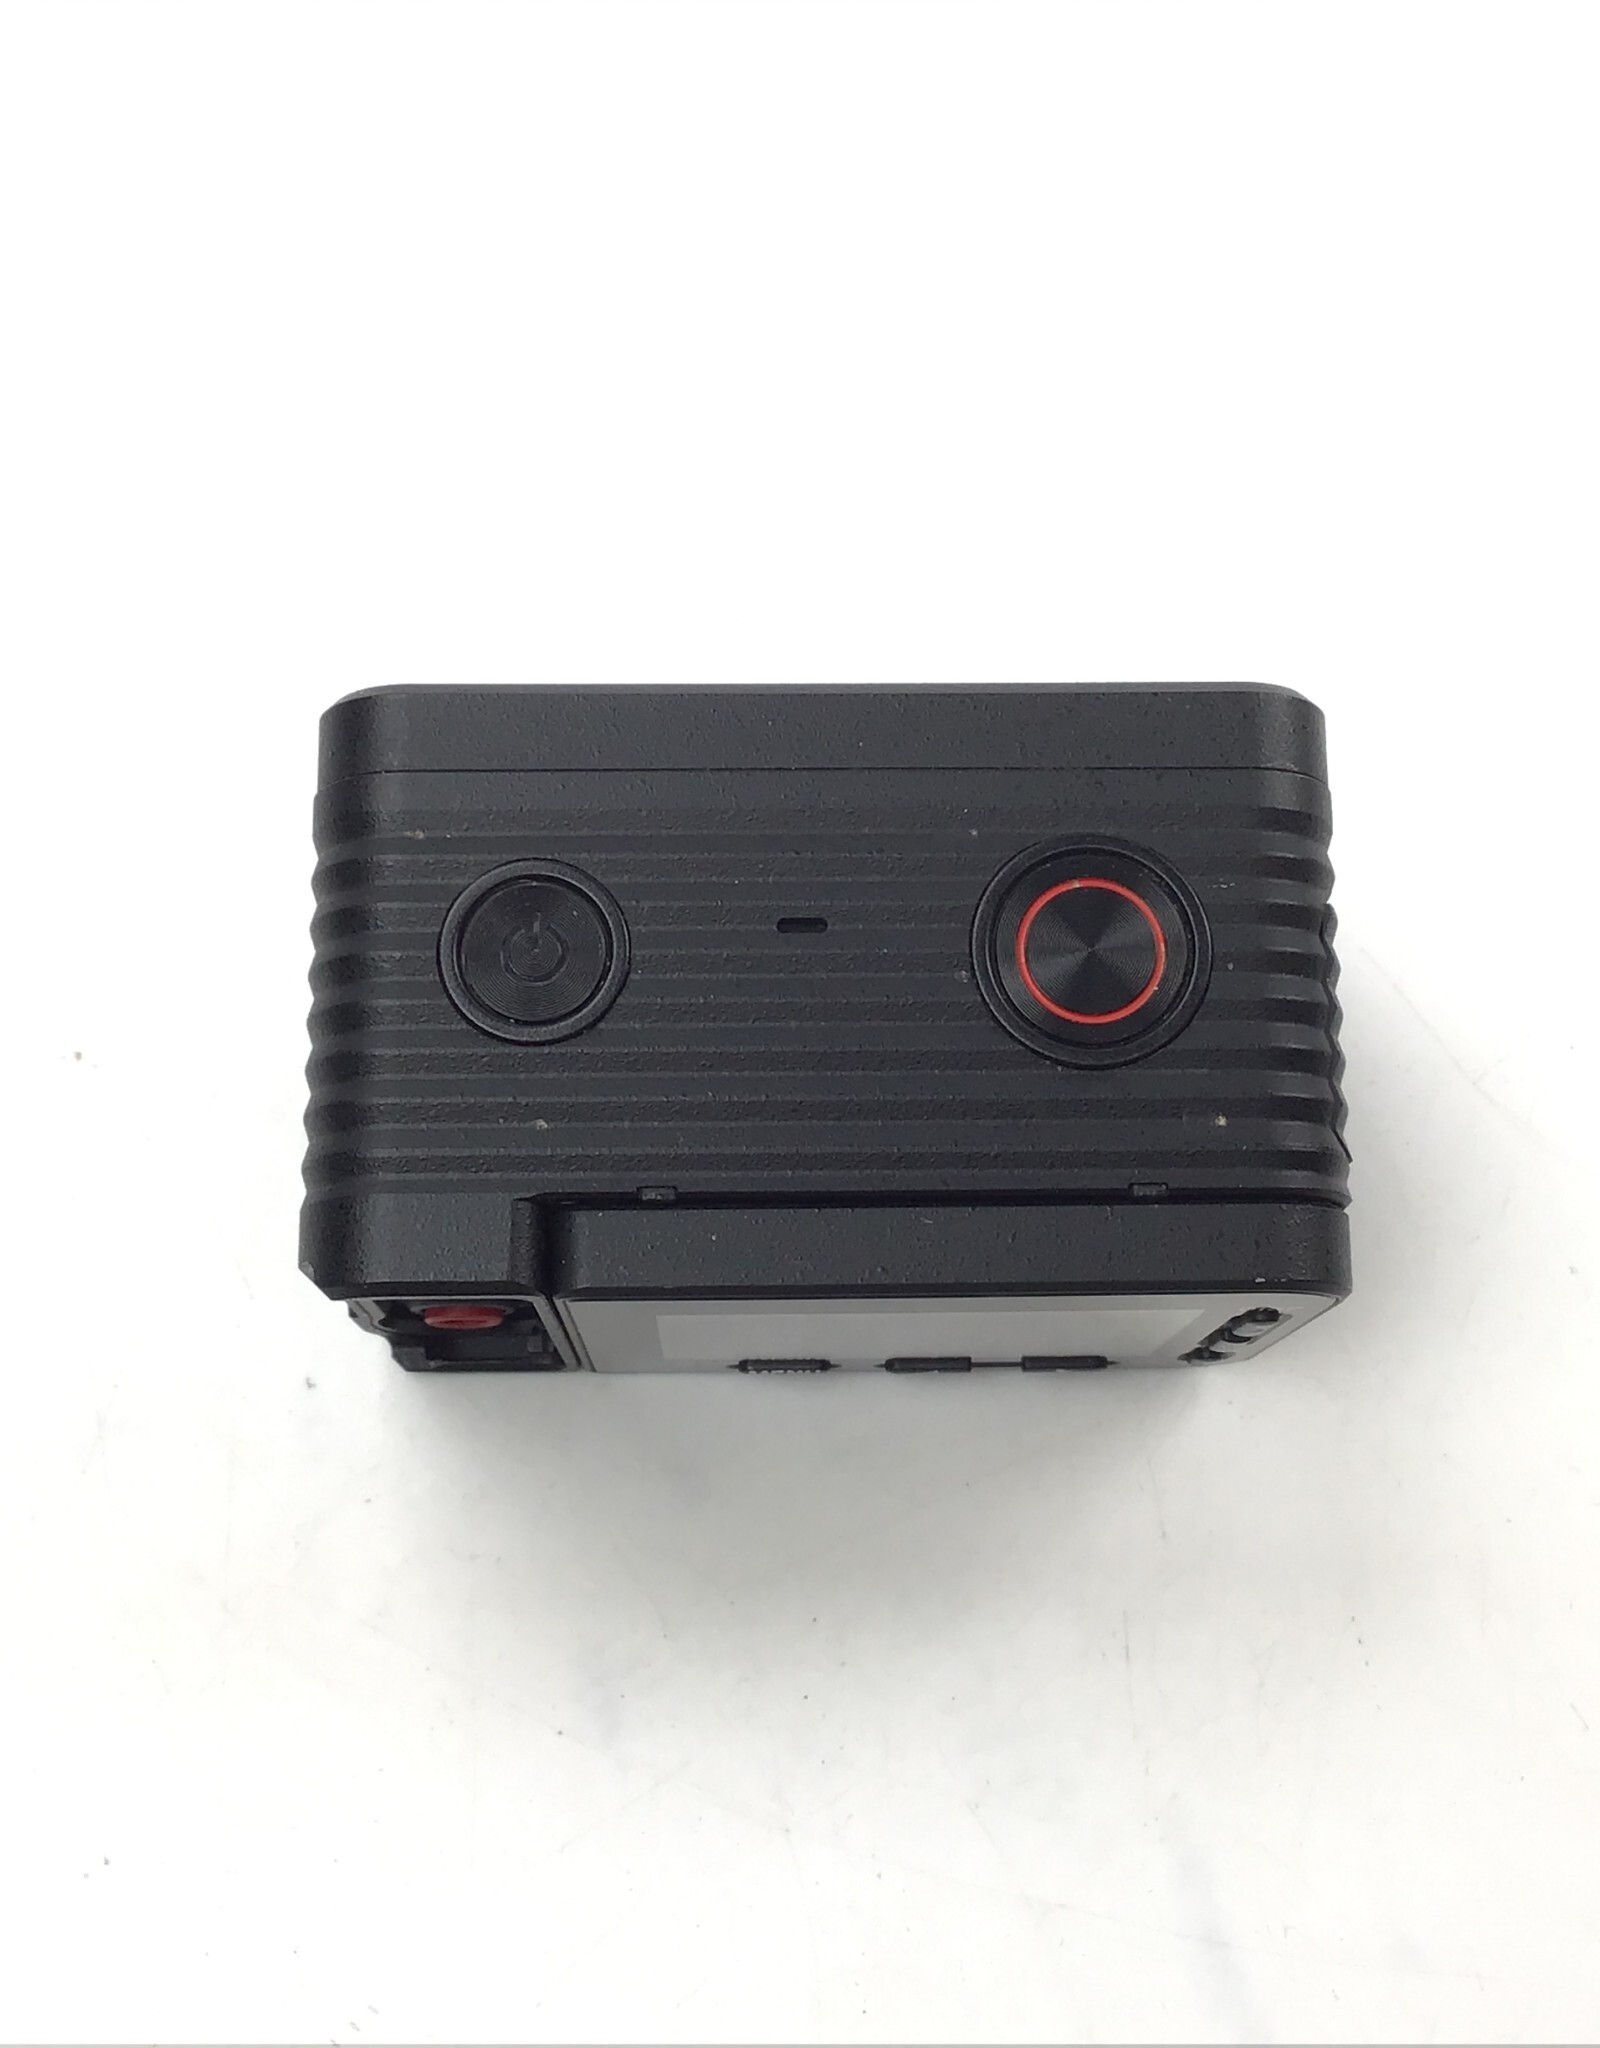 SONY Sony RX0 II Camera Missing Back Cover Used Fair